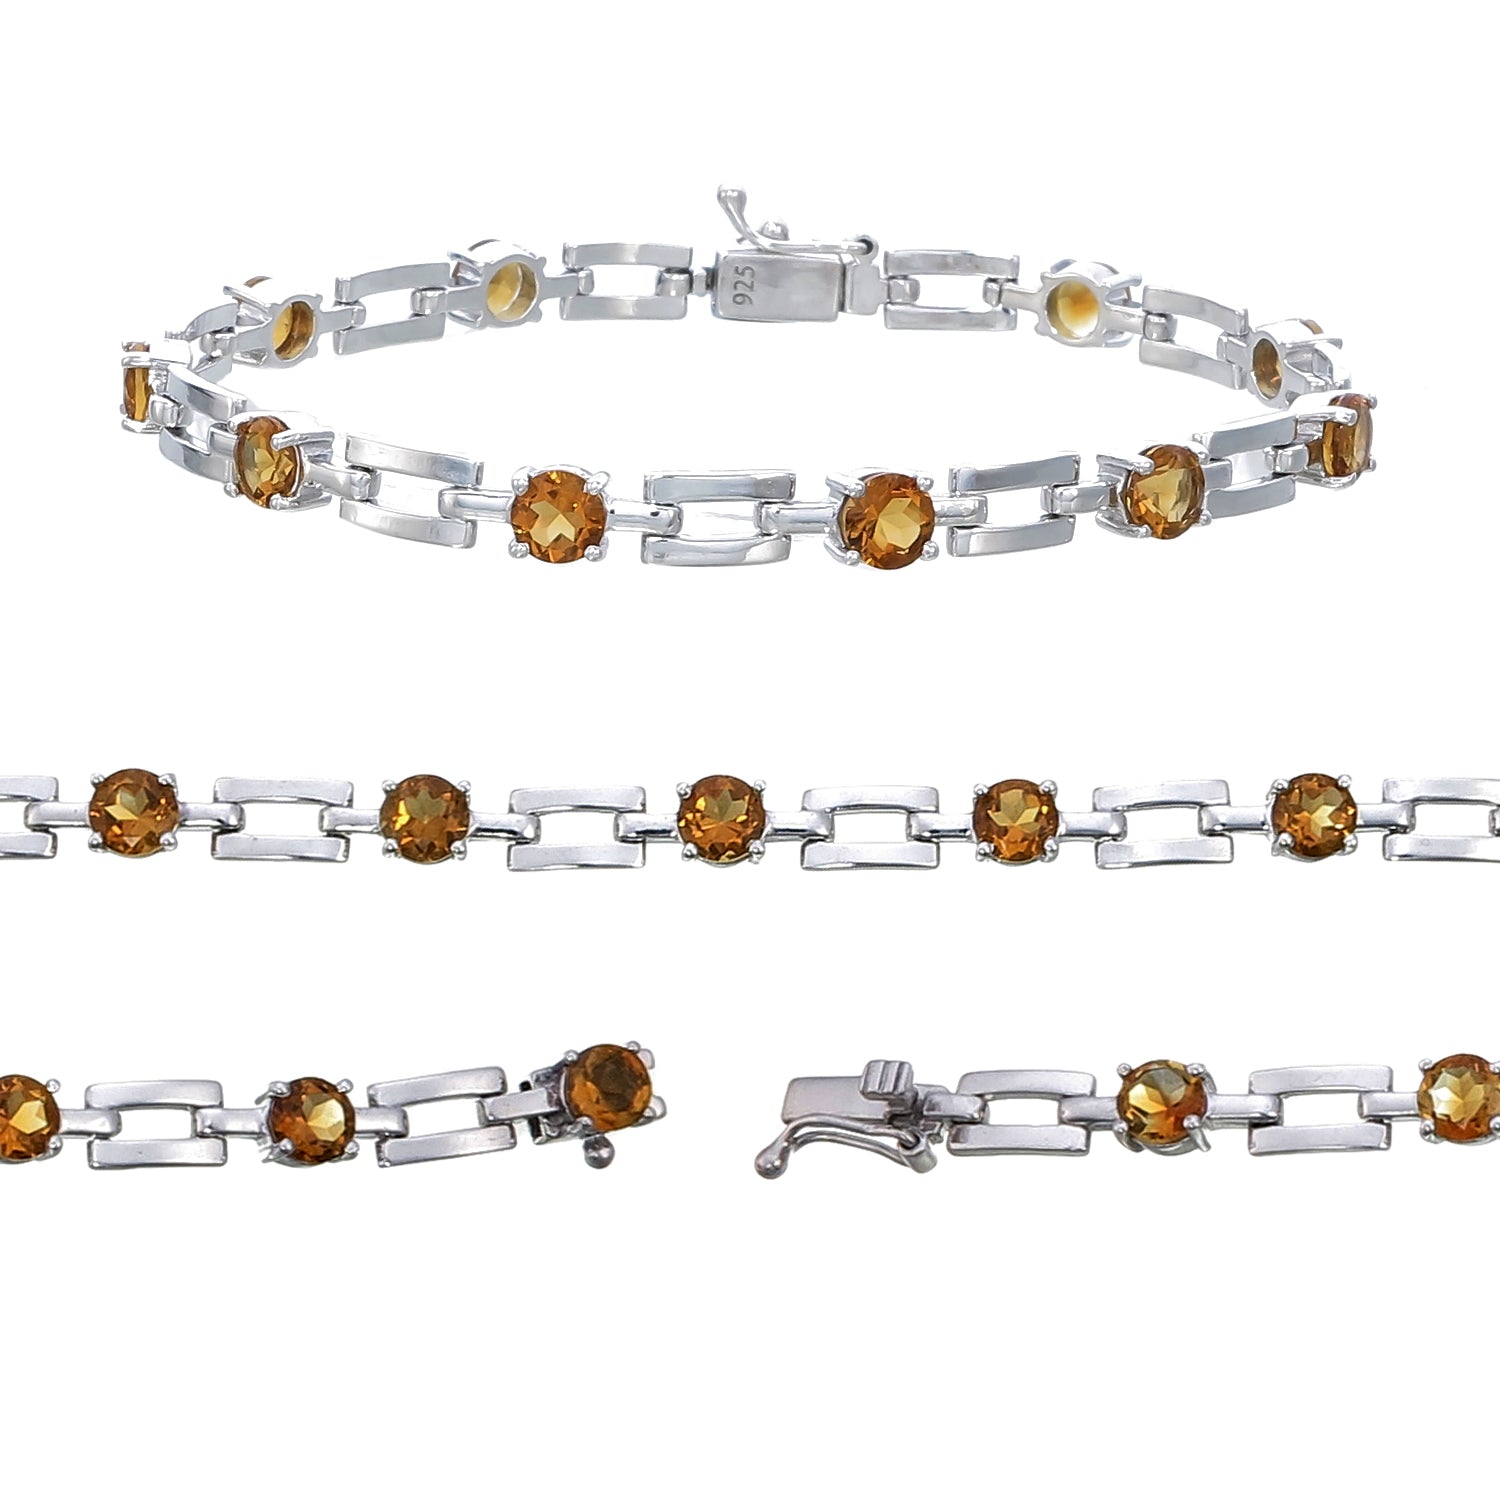 3.50 cttw Citrine Bracelet in .925 Sterling Silver with Rhodium Plating Round